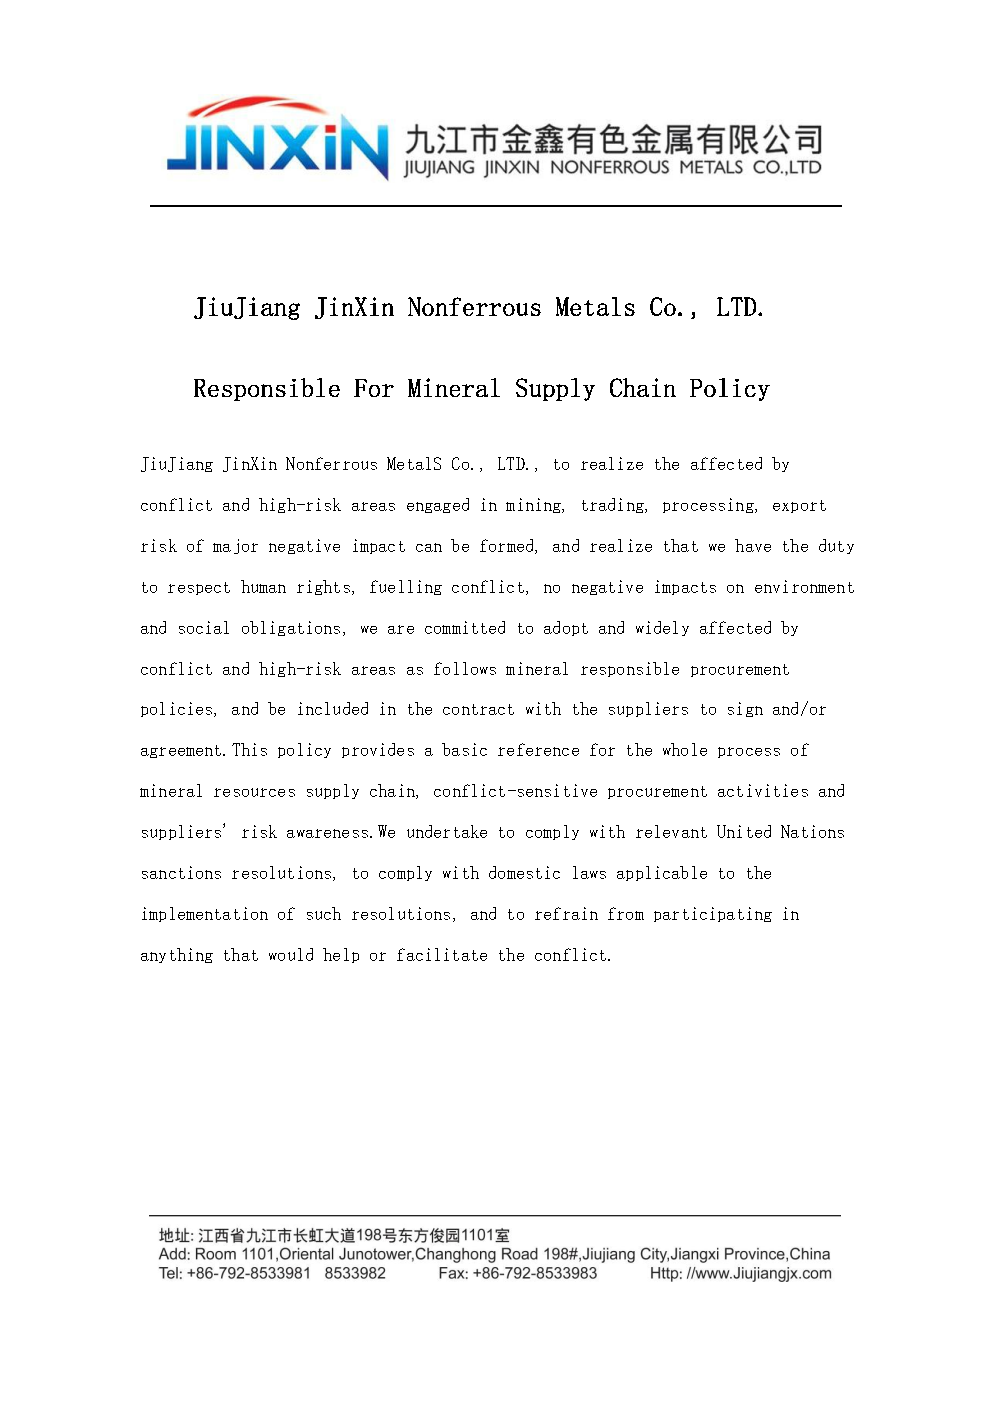 Responsible mineral Supply chain policy-JINXIN